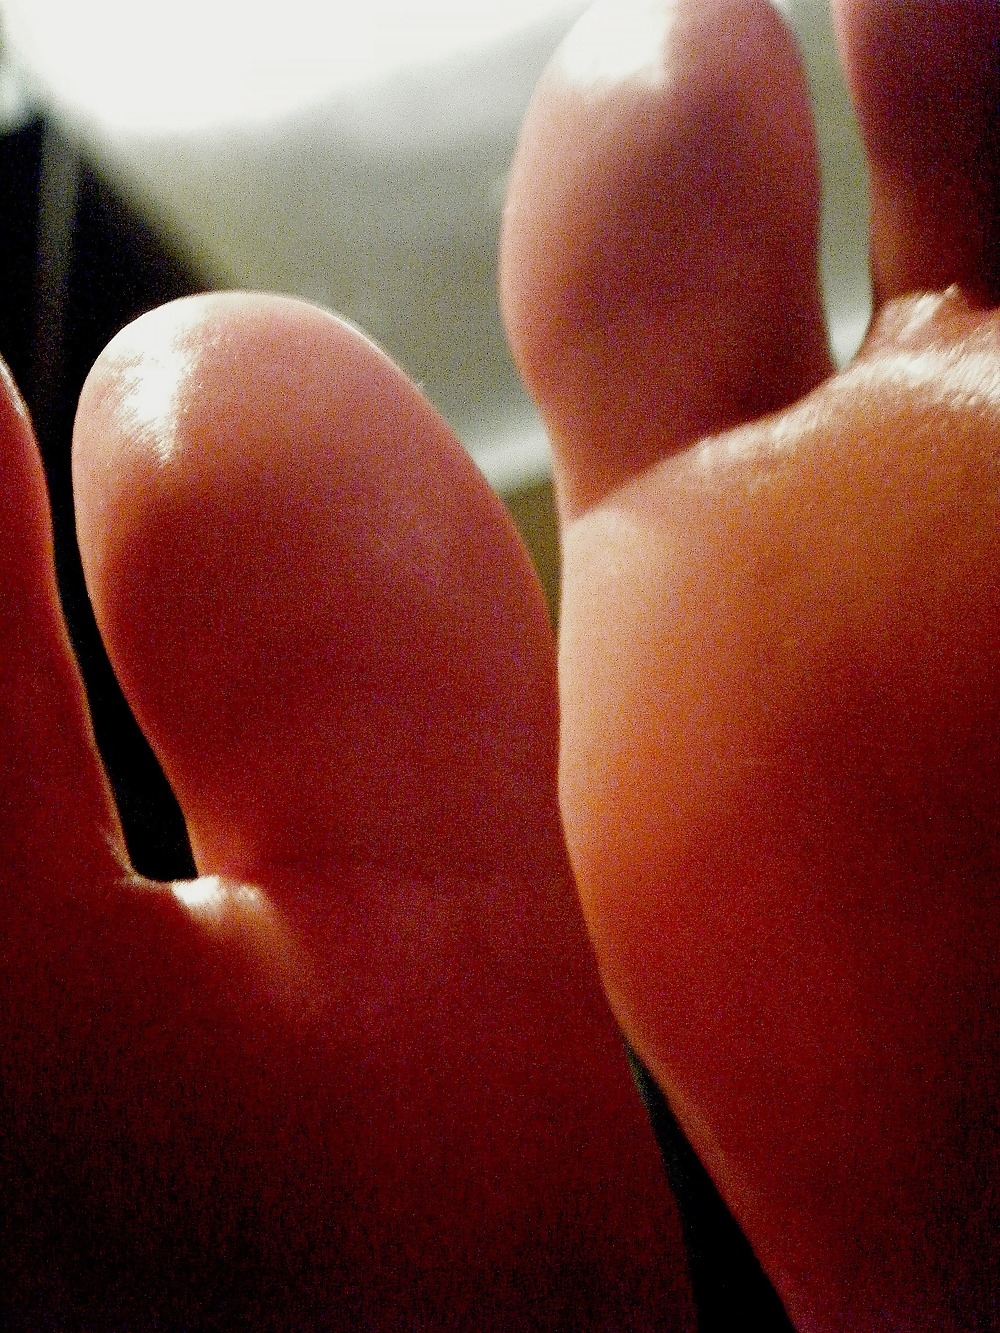 More candid shots of my wife's exquisite feet and toes #1762117